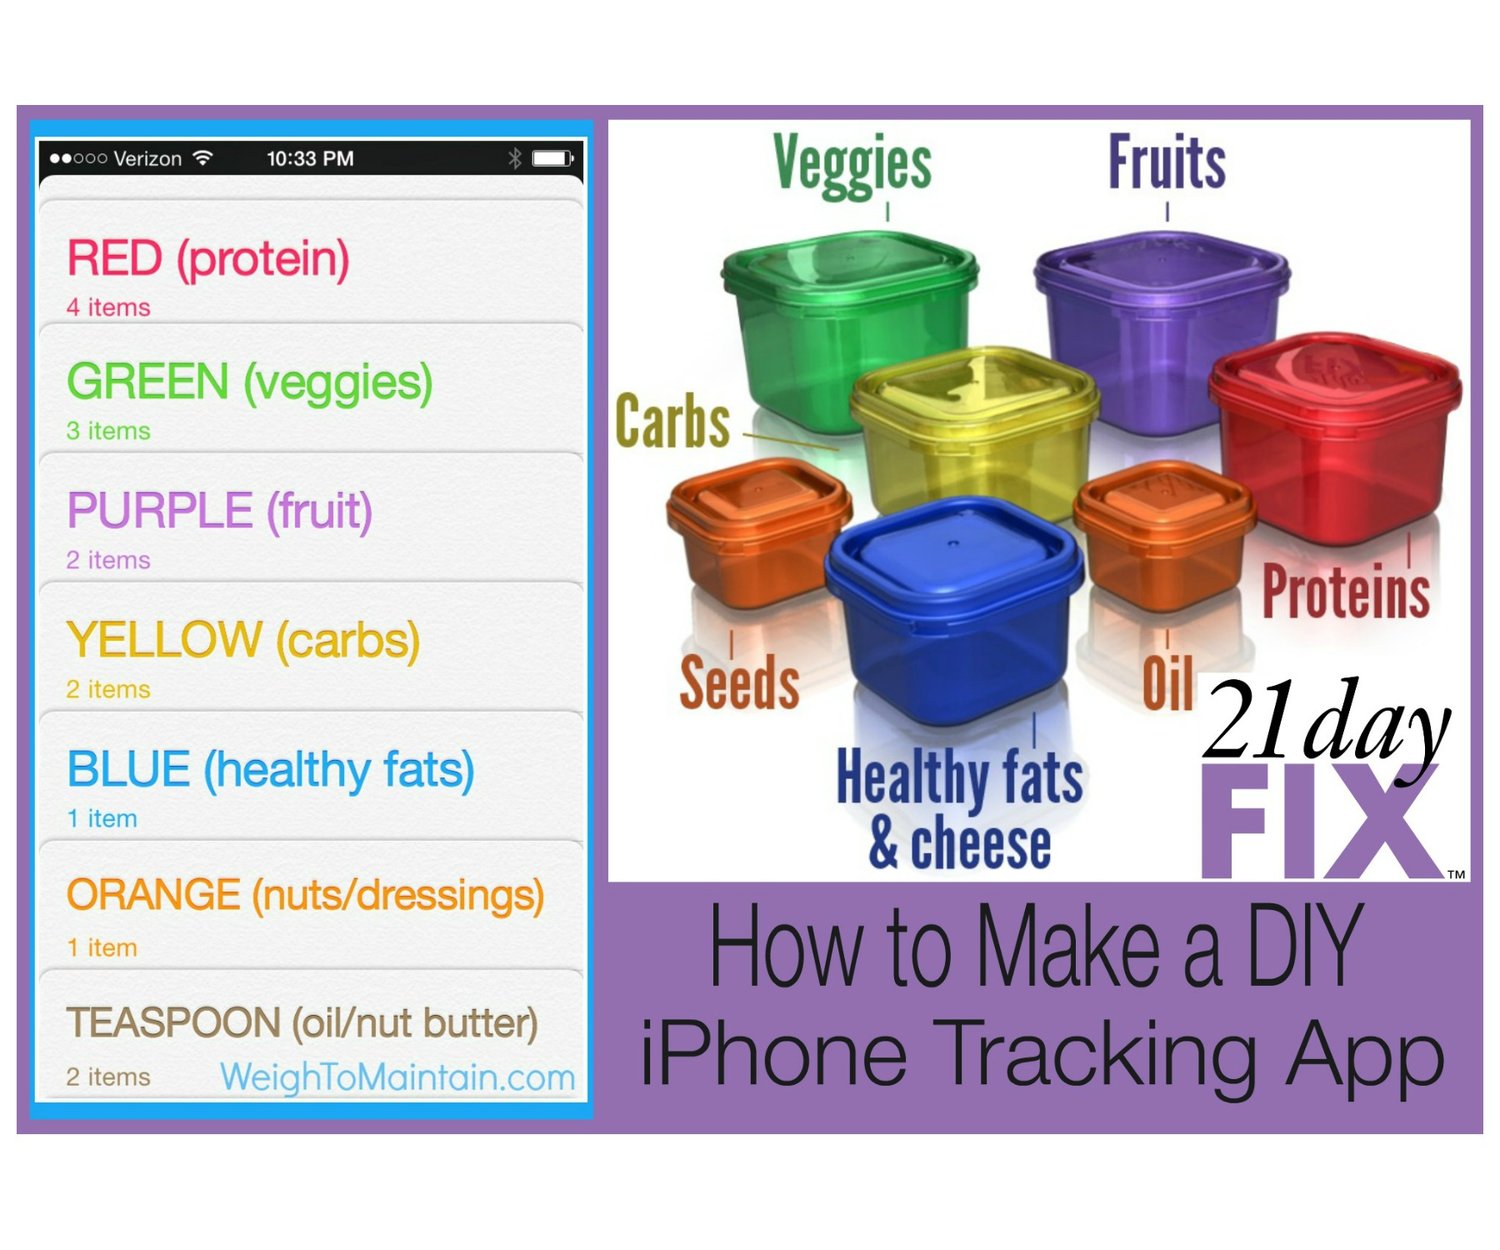 How to Make Your Own 21 Day Fix Tracker App - Use iPhone Reminders 